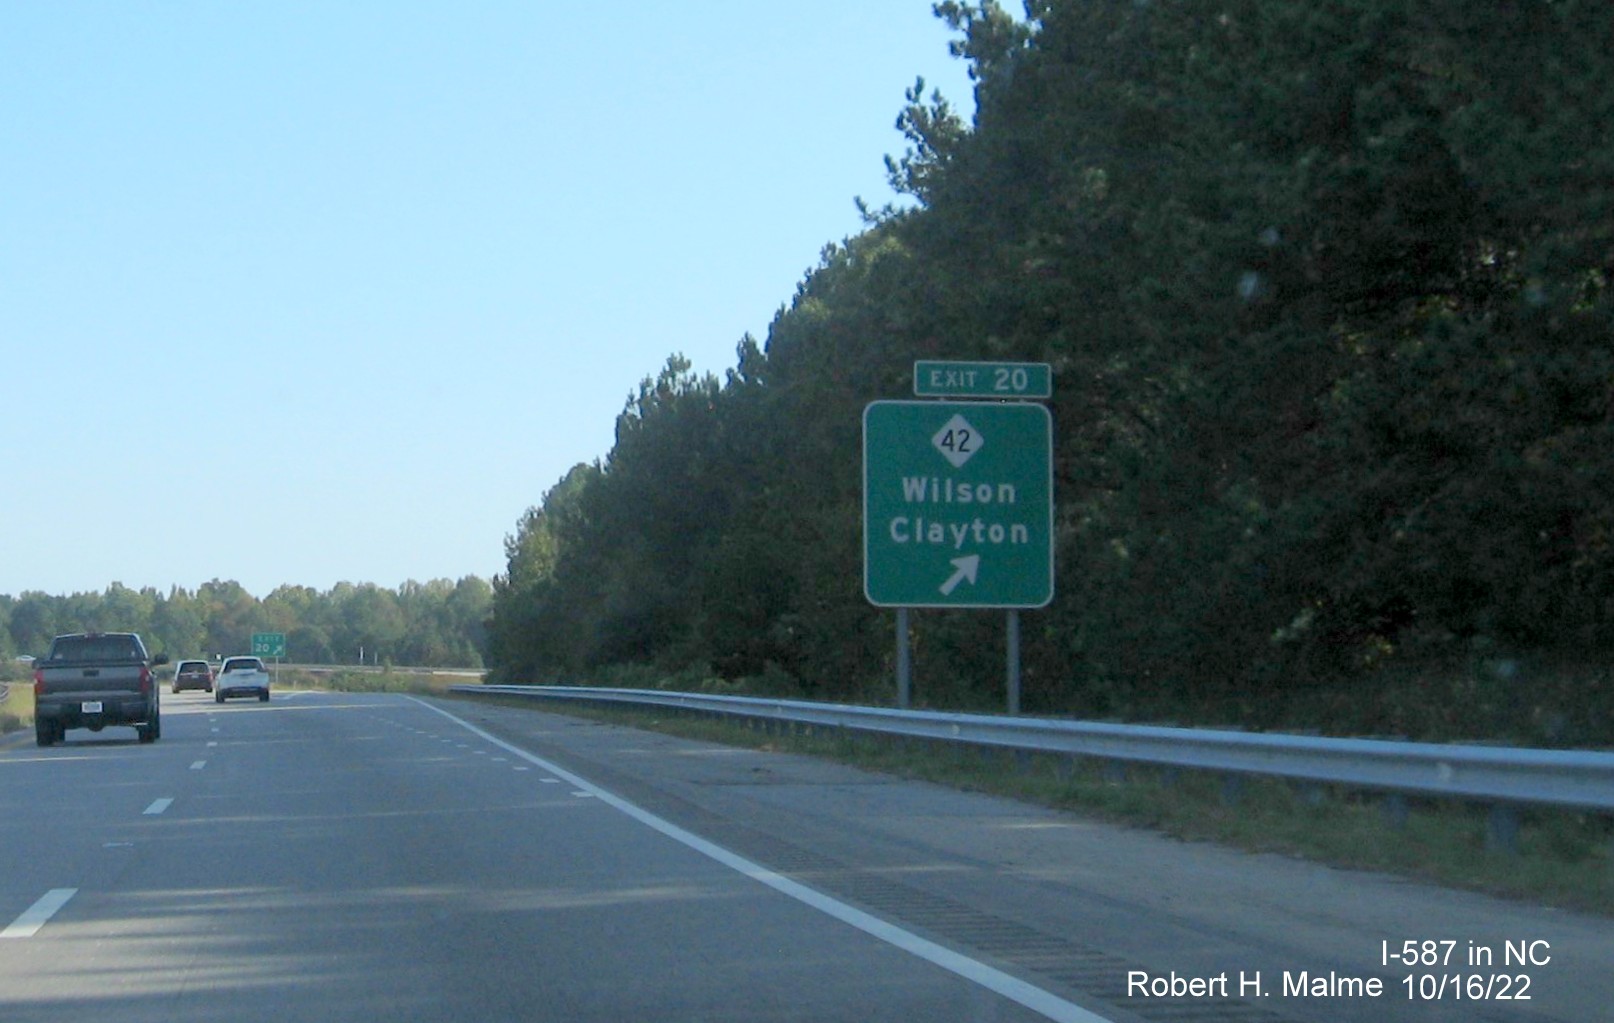 Image of ground mounted ramp sign for NC 42 exit with new I-587 milepost exit number on I-587/US 264 East,I-795 
                                        South in Wilson, October 2022